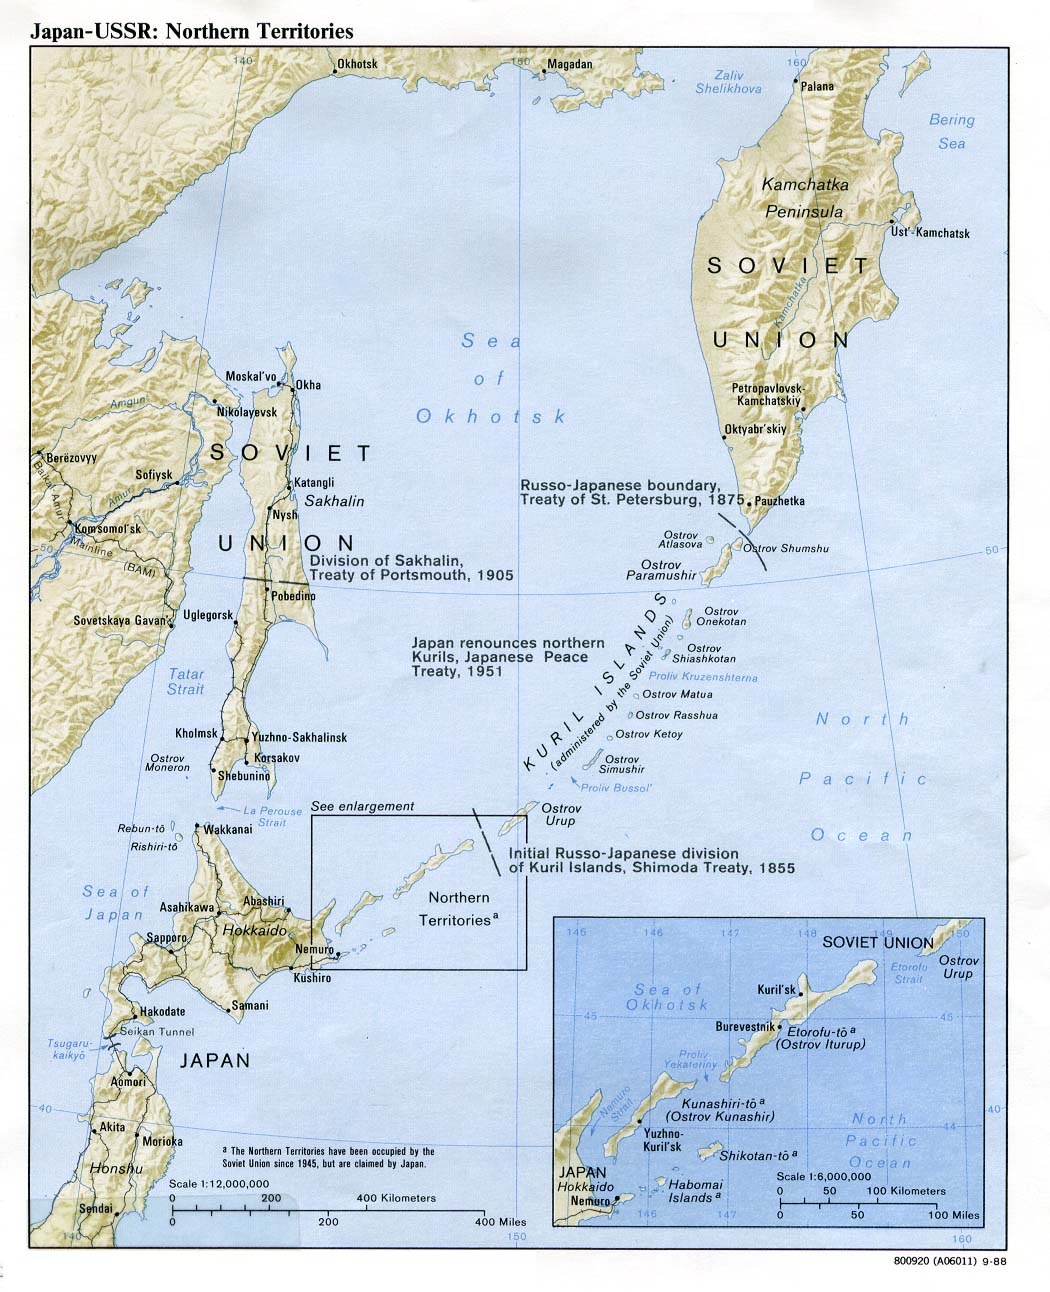 Map Of Japan , Japan-USSR: Northern Territories [Shaded Relief Map] 1988 (230K) 